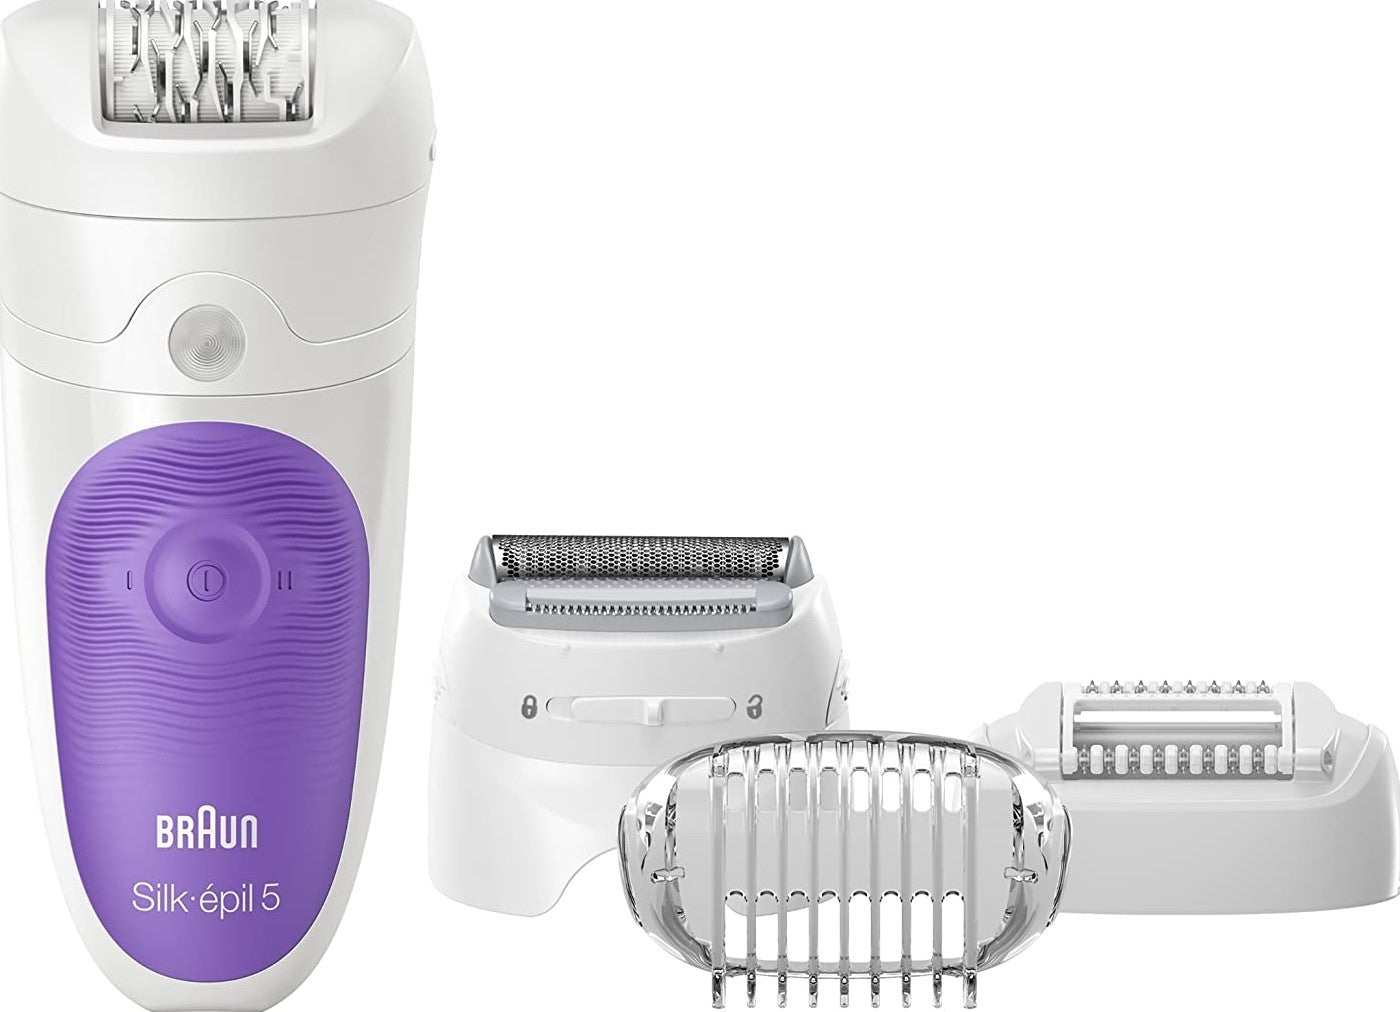 Braun Silk Epil 5 5-541 Wet & Dry Cordless Epilator With 5 Extras Including a Shaver Head And a Trimmer Cap